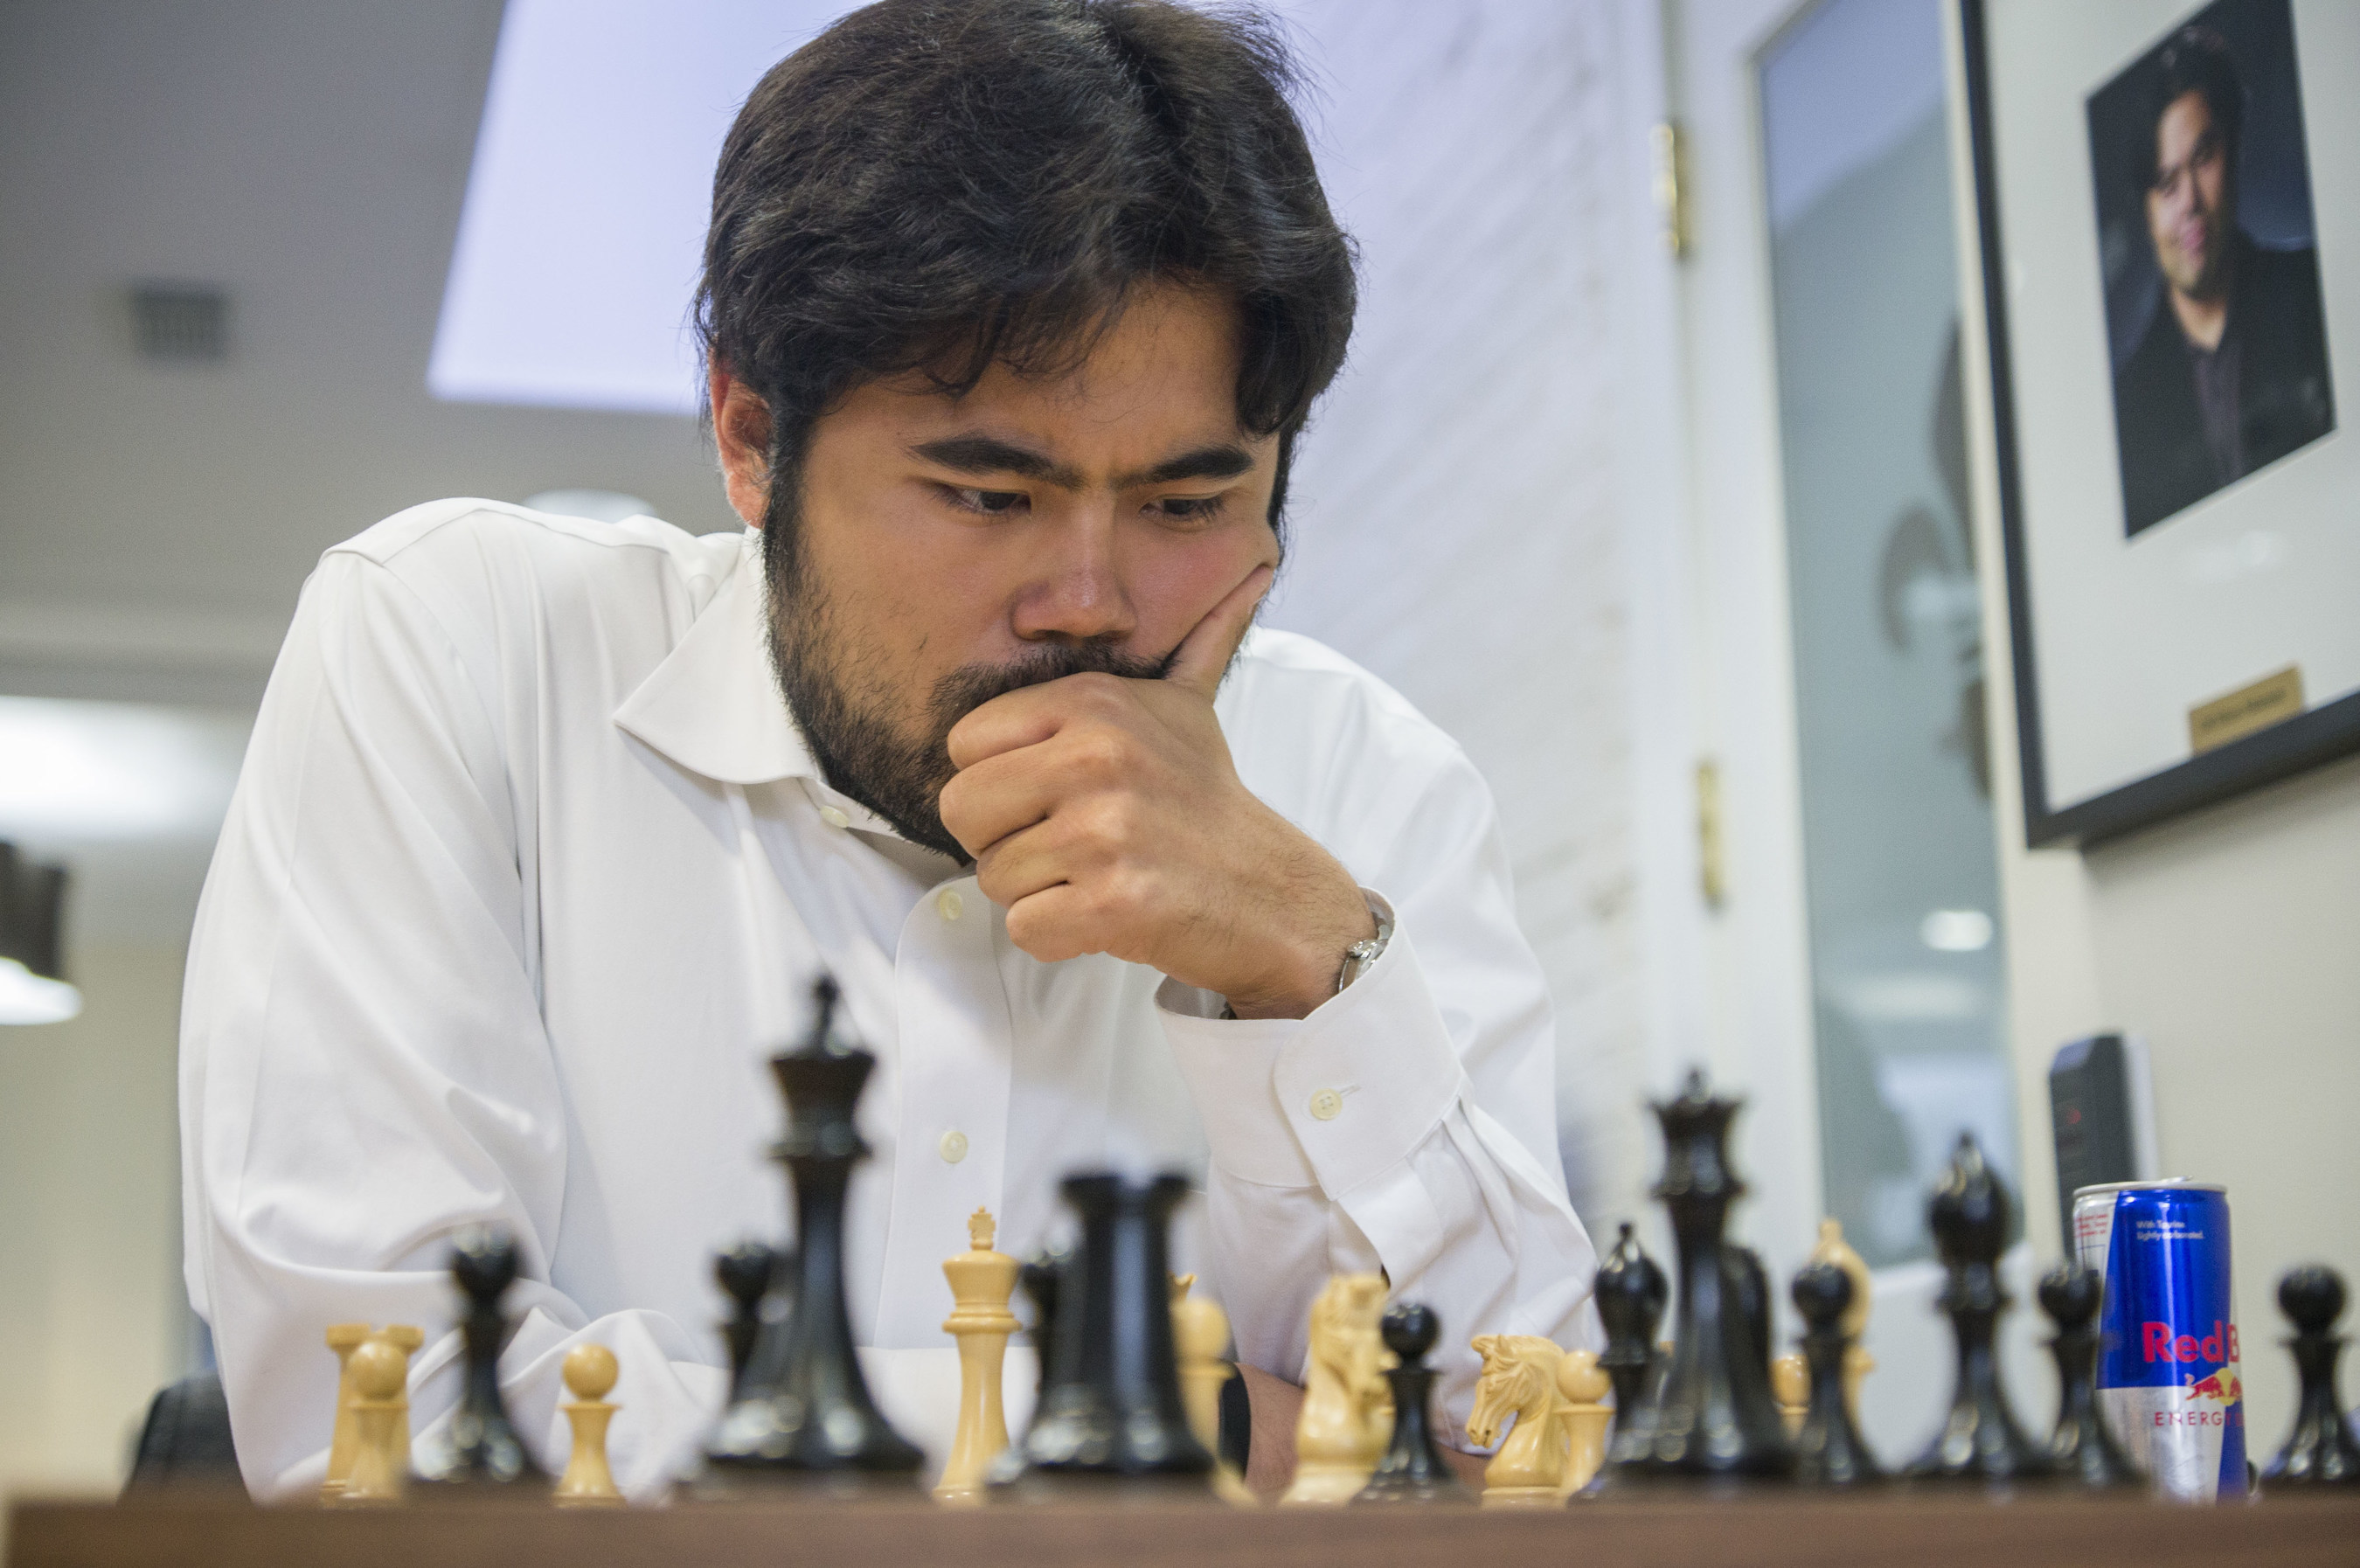 Chess Grandmaster Hikaru Nakamura, the No. 1 ranked American, won the 2015 U.S. Chess Championship Sunday at the Chess Club & Scholastic Center of Saint Louis. The competition is part of the "Triple Crown" of American chess championships held in Saint Louis each year. Nakamura, 27, lives in St. Louis. Photo credited to Lennart Ootes, Chess Club and Scholastic Center of Saint Louis.